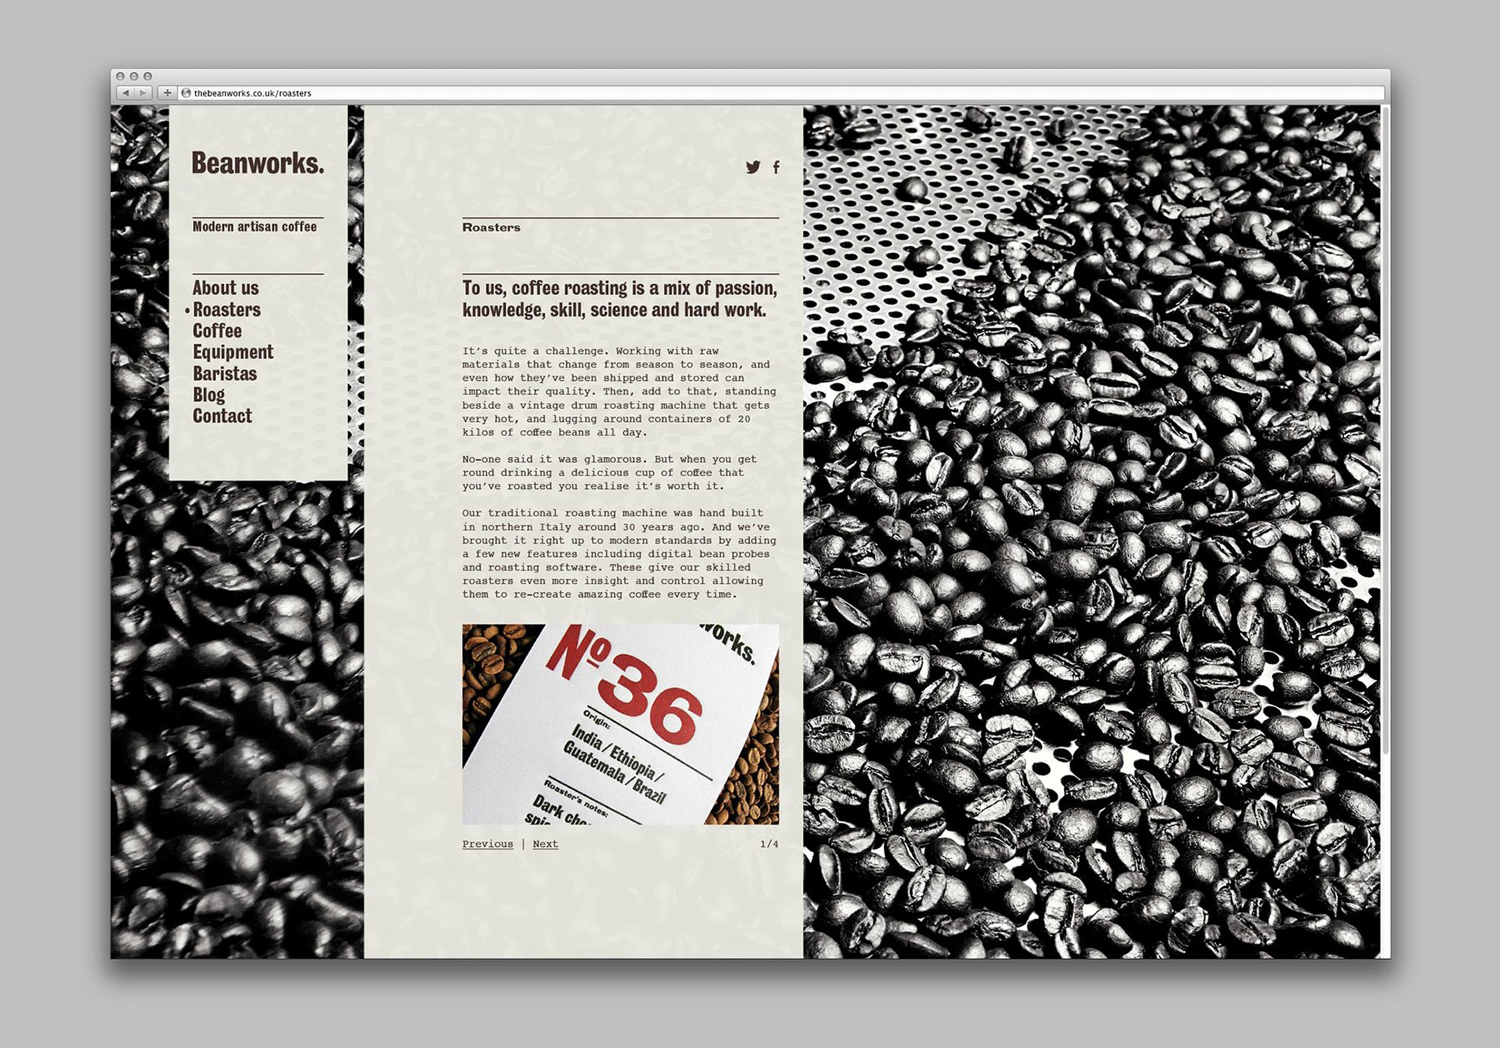 Brand Identity and website for Beanworks designed by Paul Belford